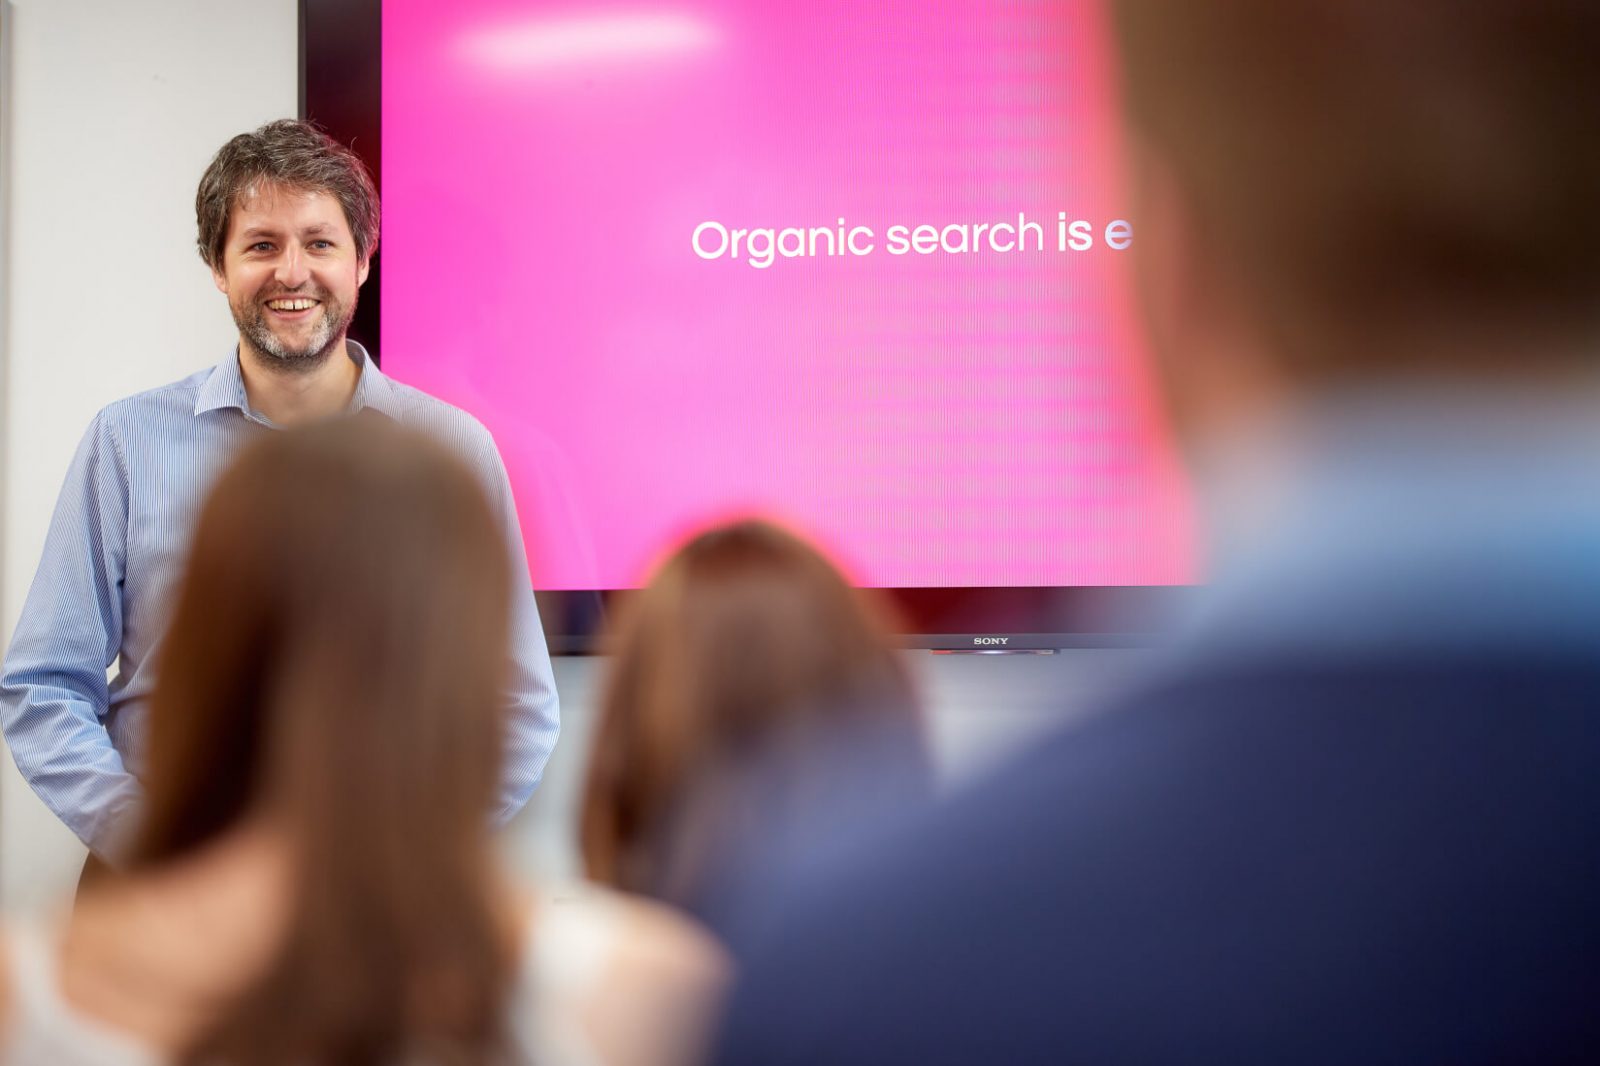 SEO agency consultant teaches organic search techniques